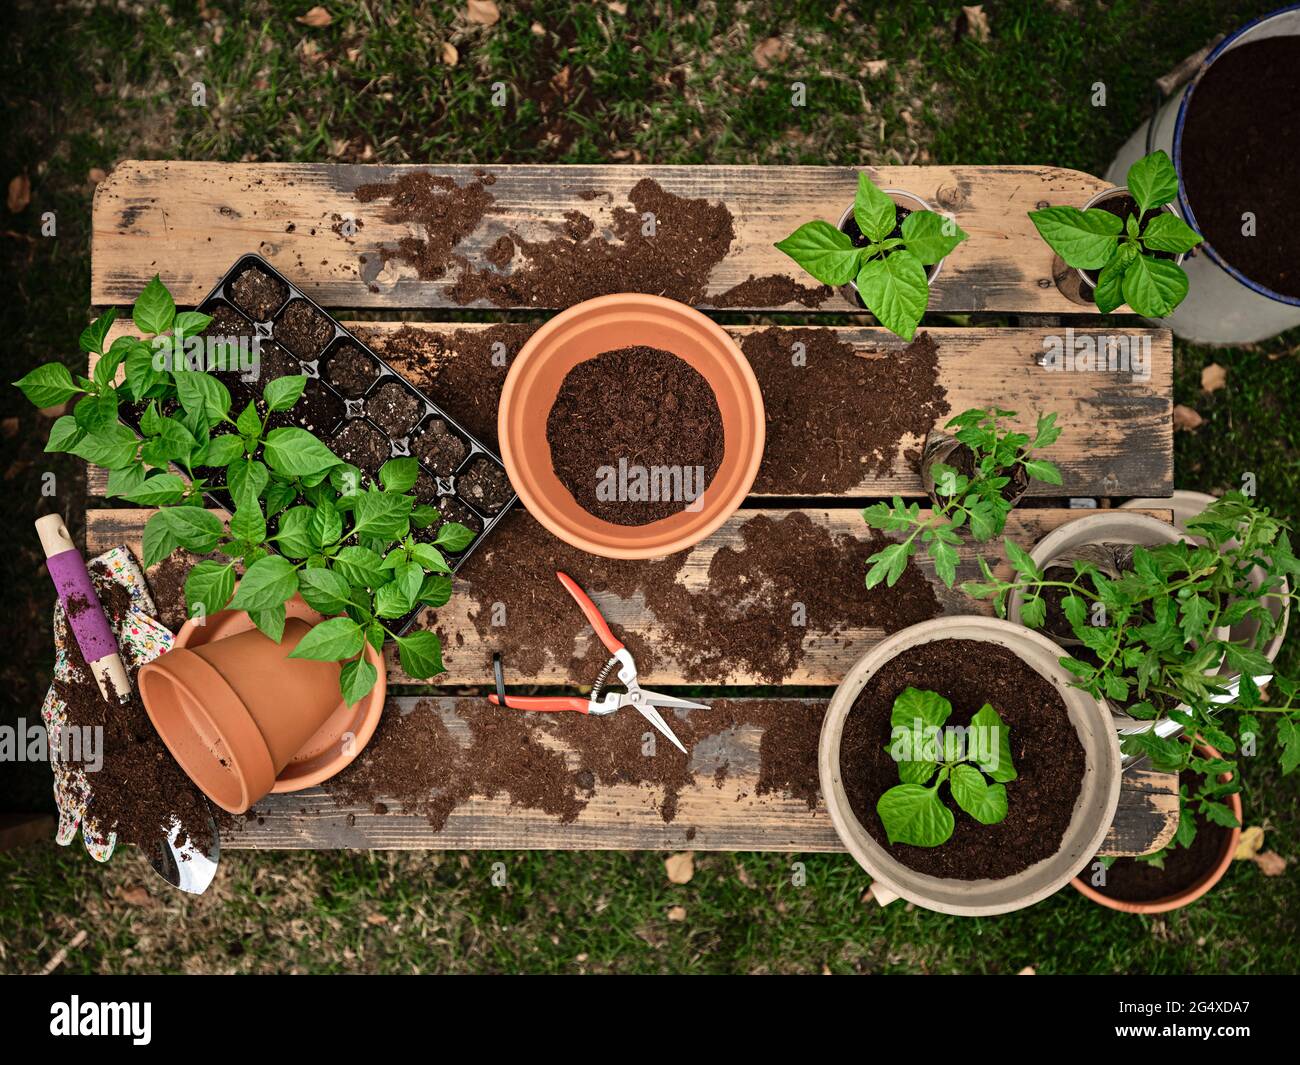 Flower pot with soil amidst seedling tray and plants on table in garden Stock Photo